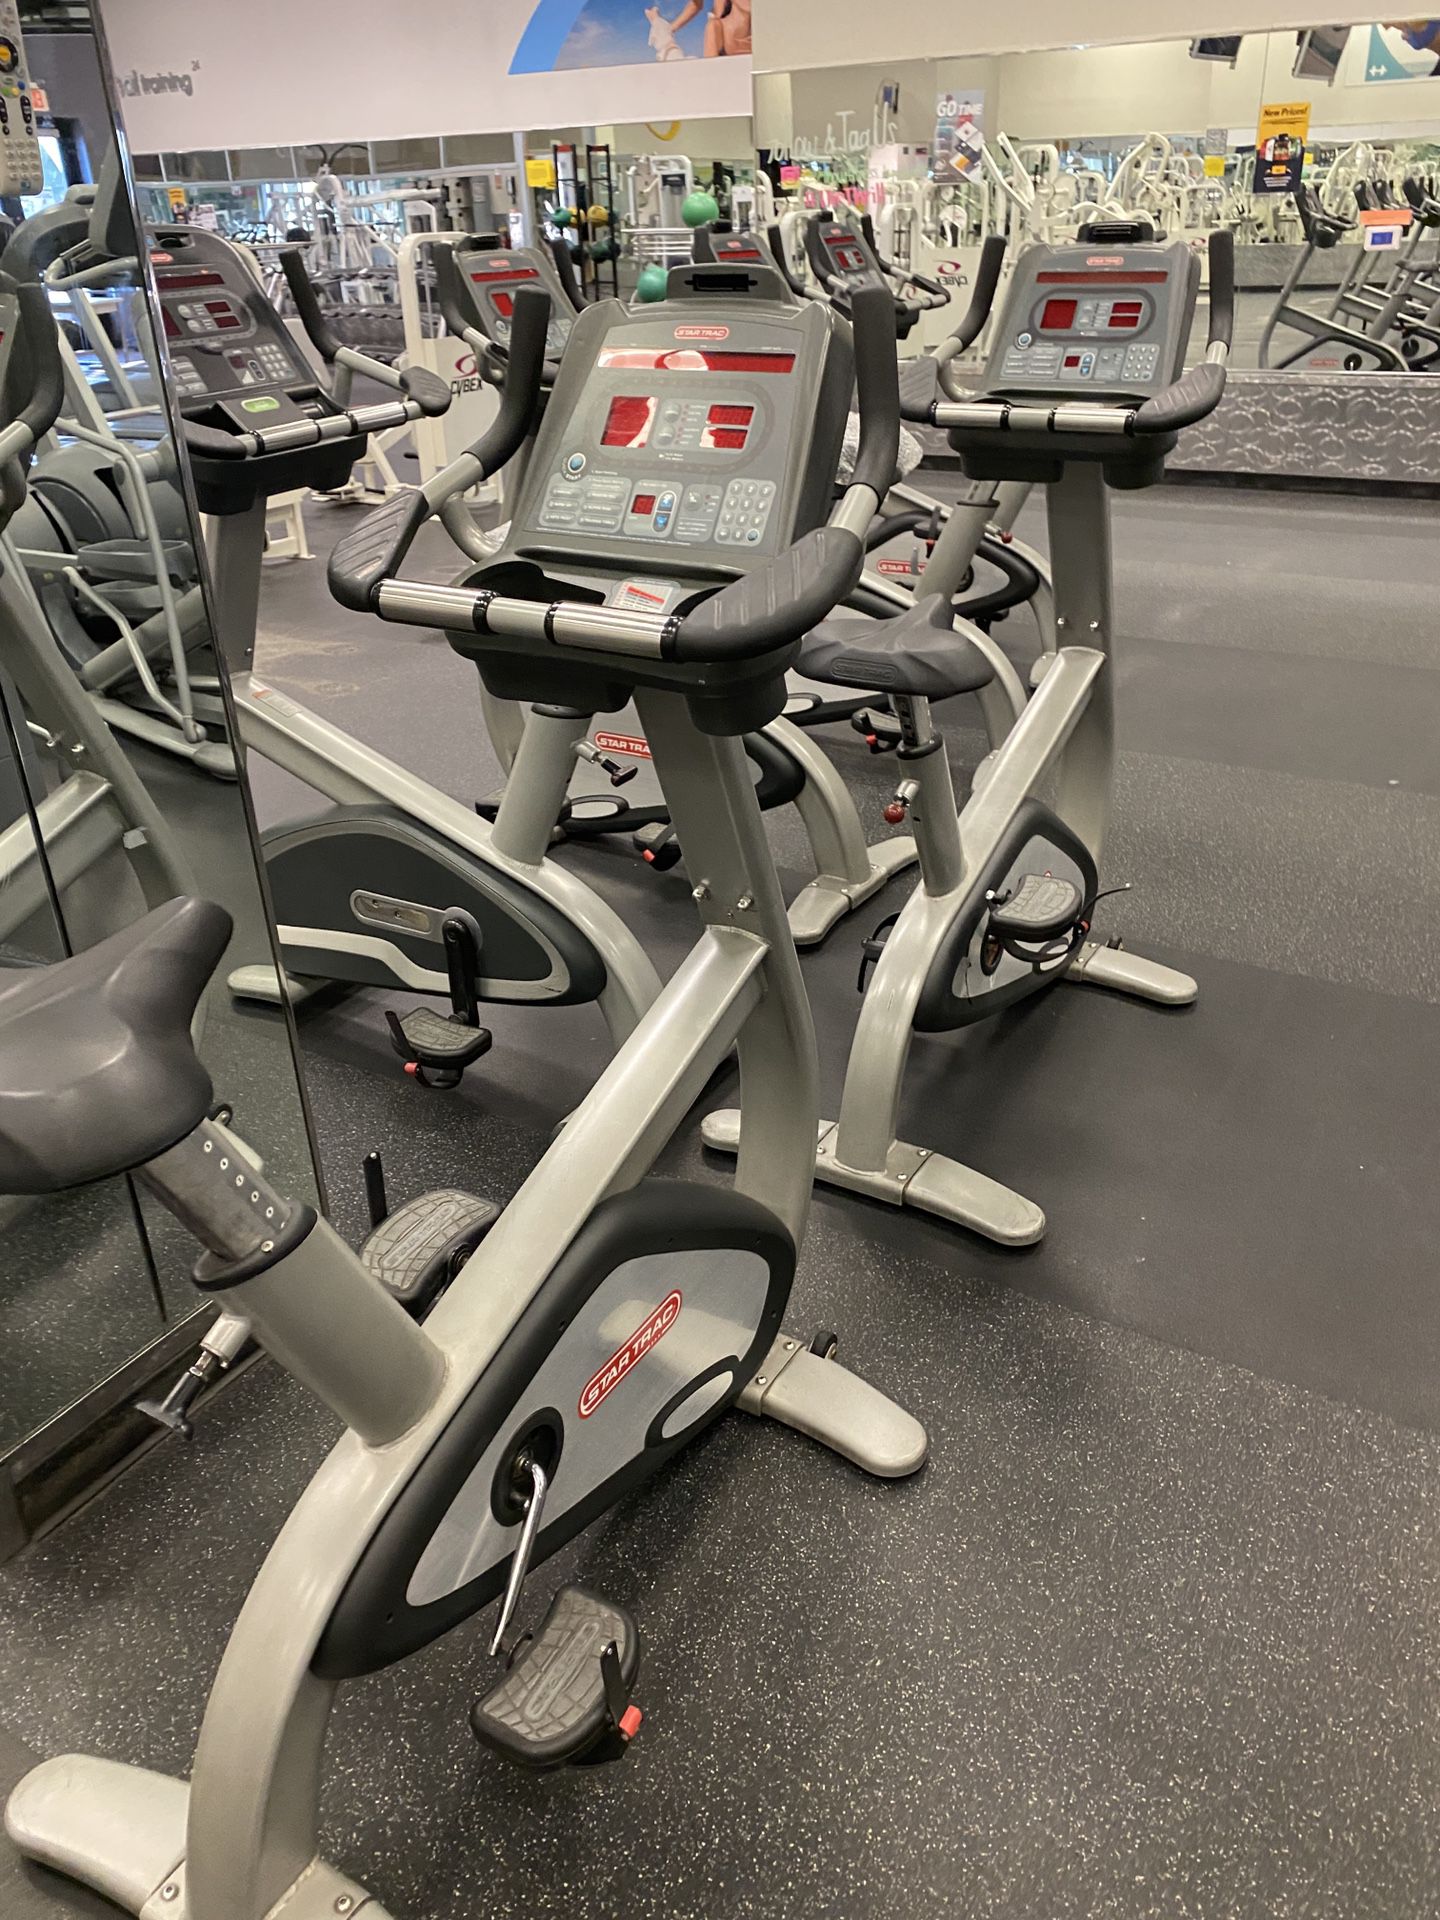 Star Trac upright exercise bikes